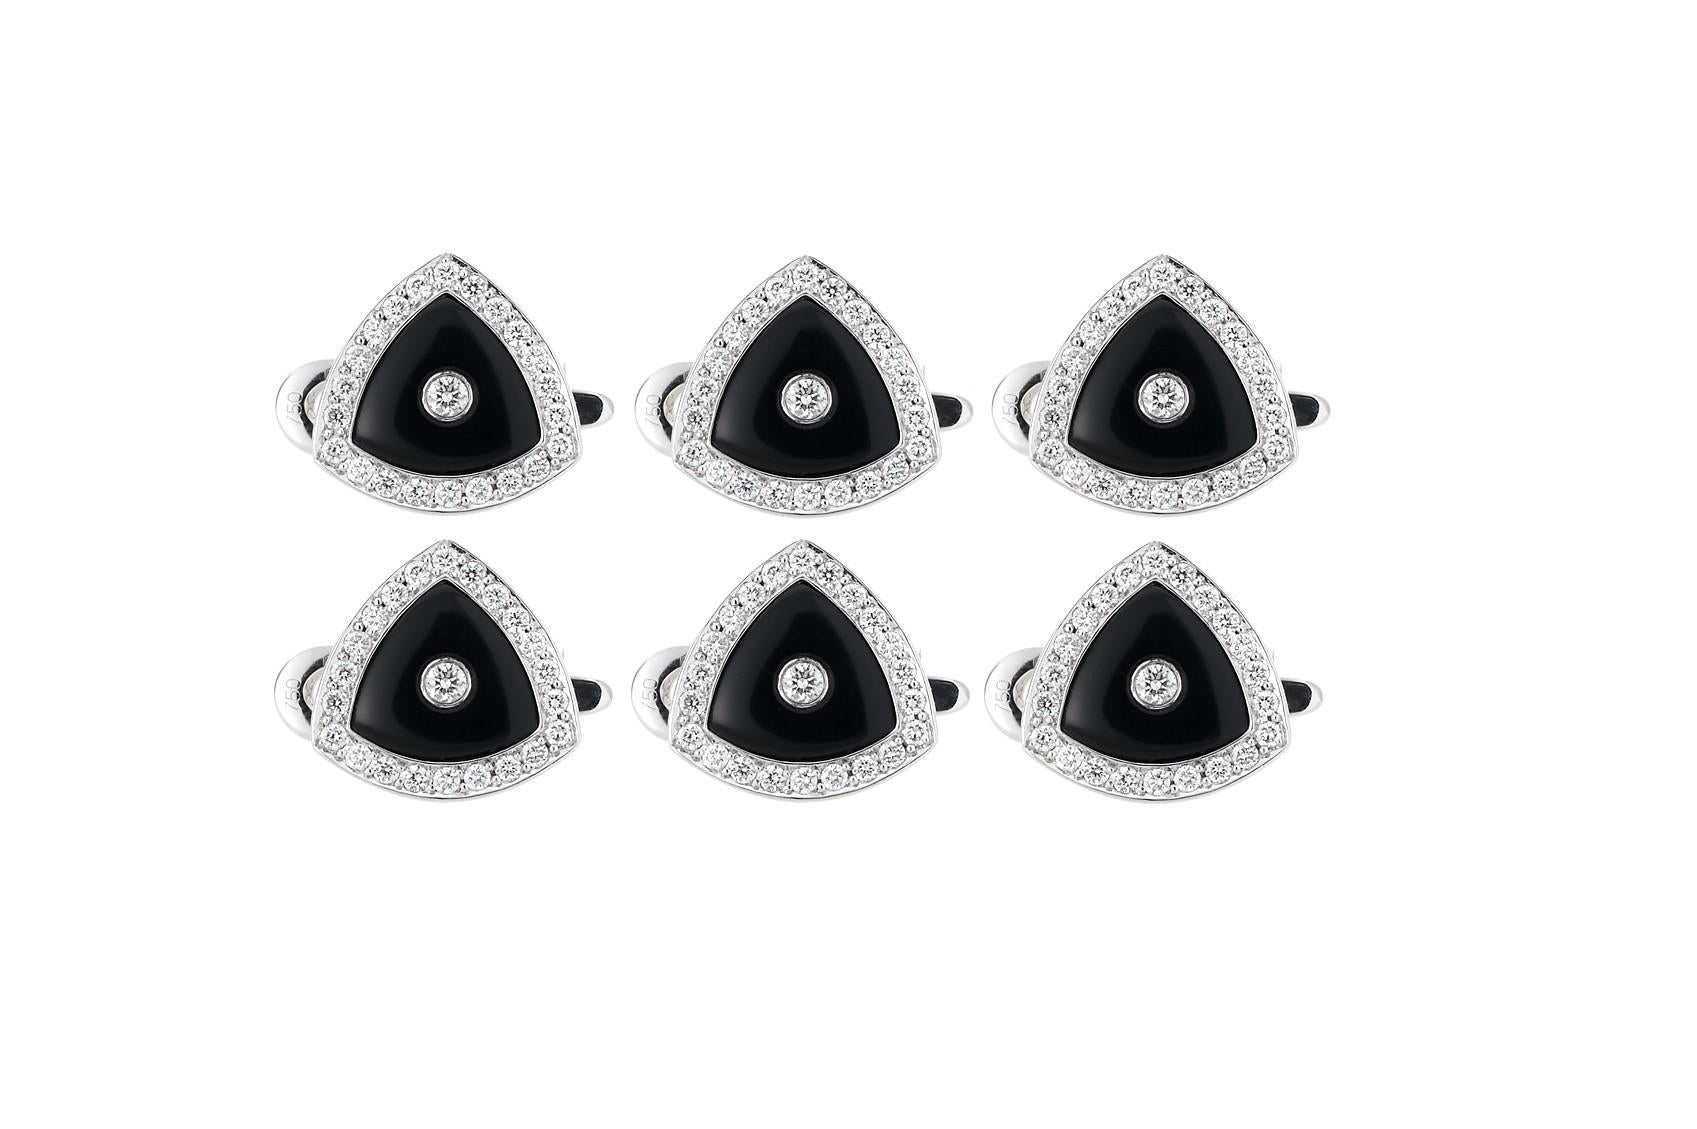 A confident and sophiscated man will always stand out from the crowd. These 18k white gold shirt buttons were designed to enhance his shirt or tuxedo. The 6 pieces of triangular buttons showcases carefully carved black onyx surrounding by a single